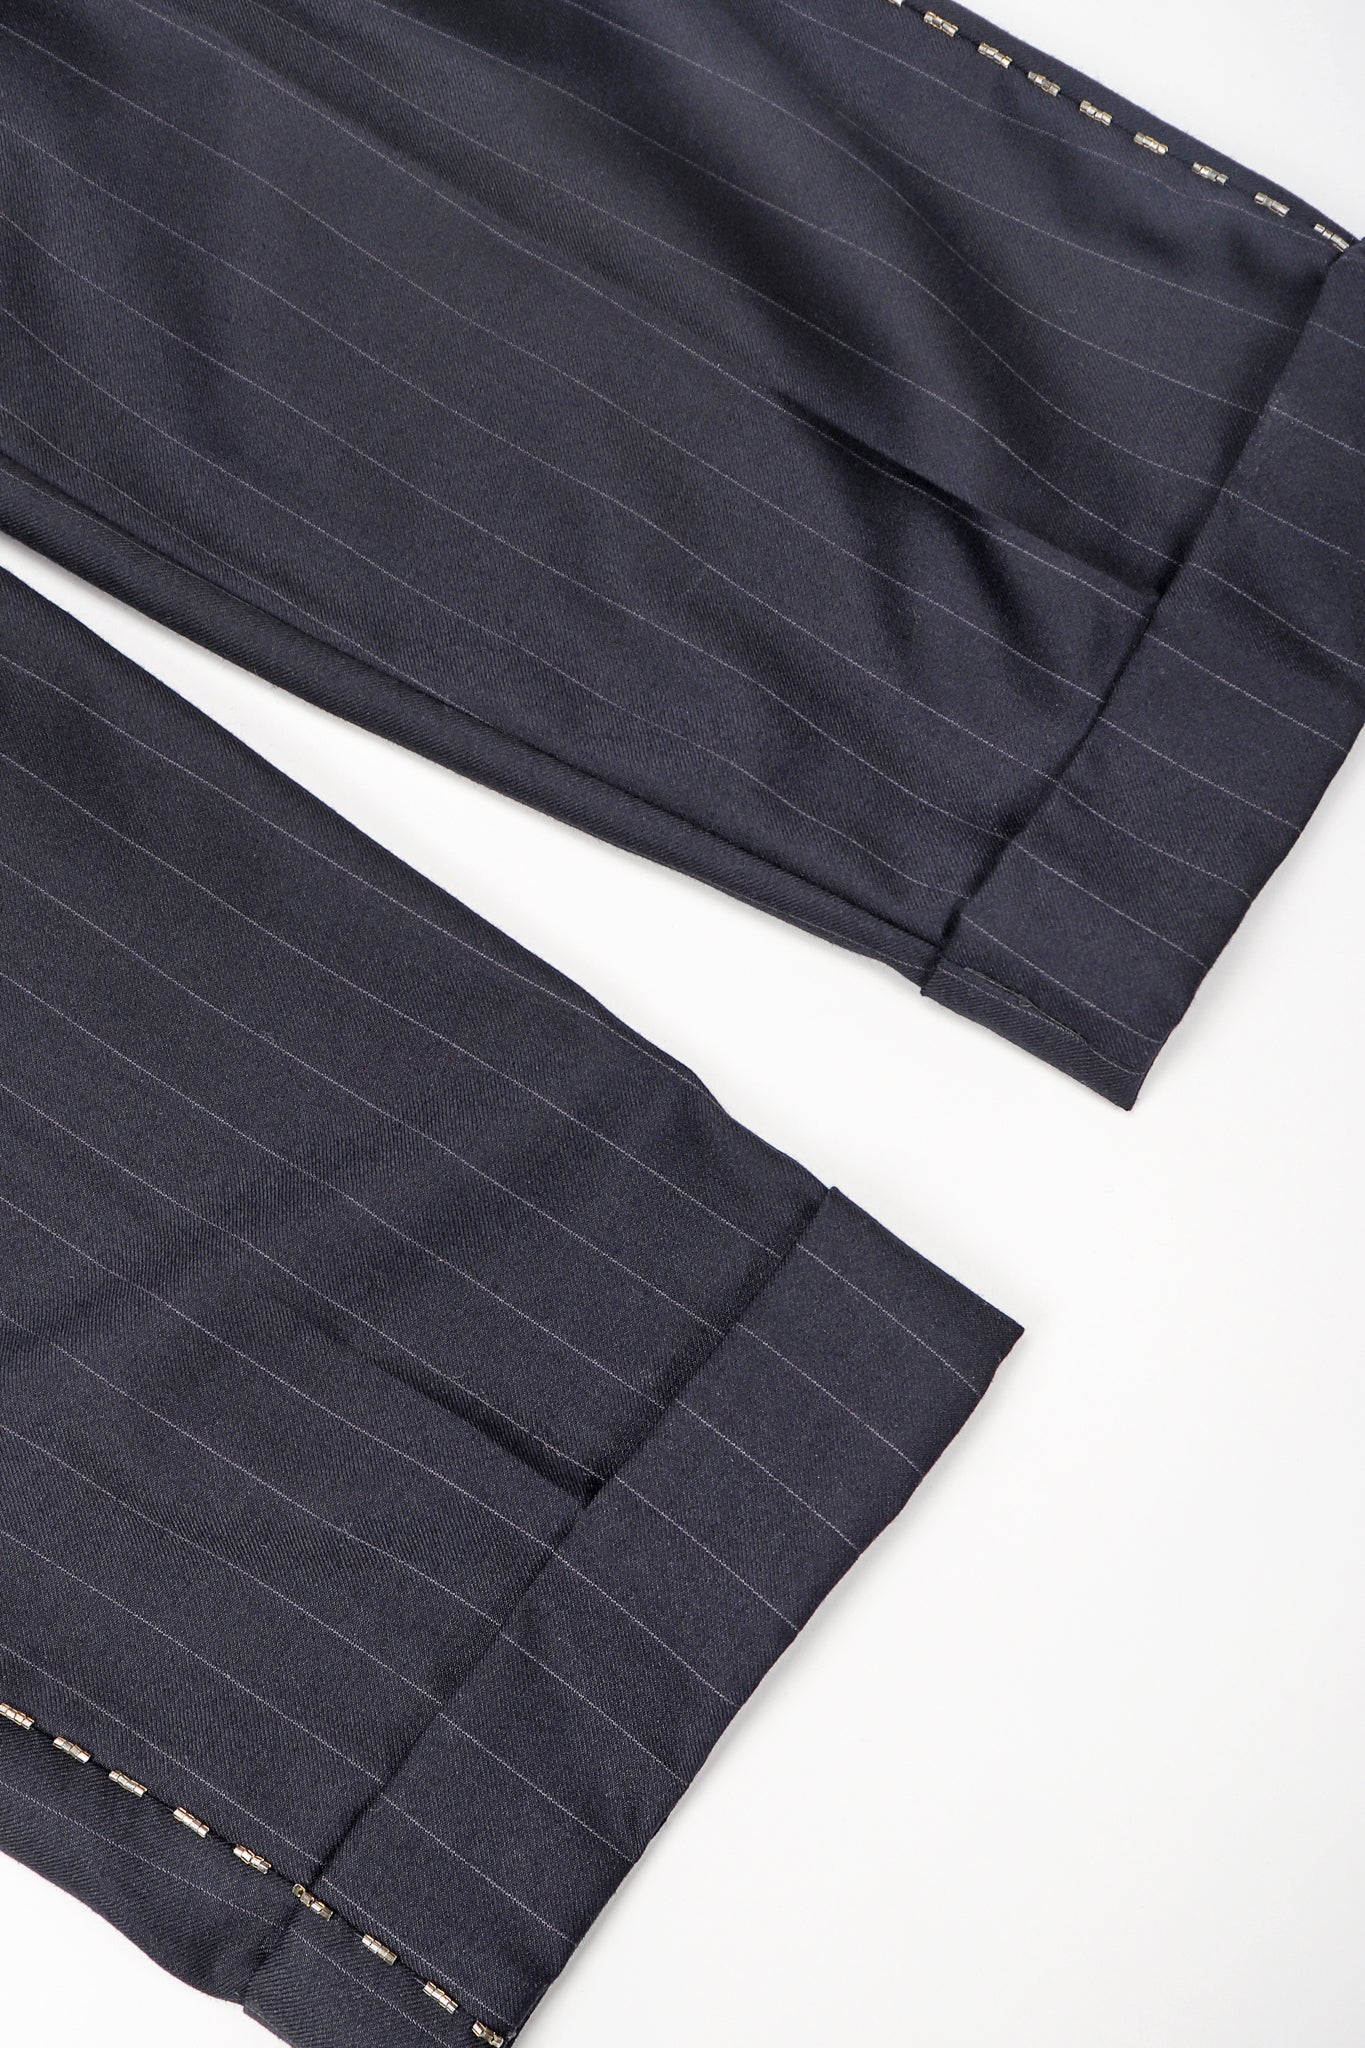 Bead-Tipped Pinstripe Suit